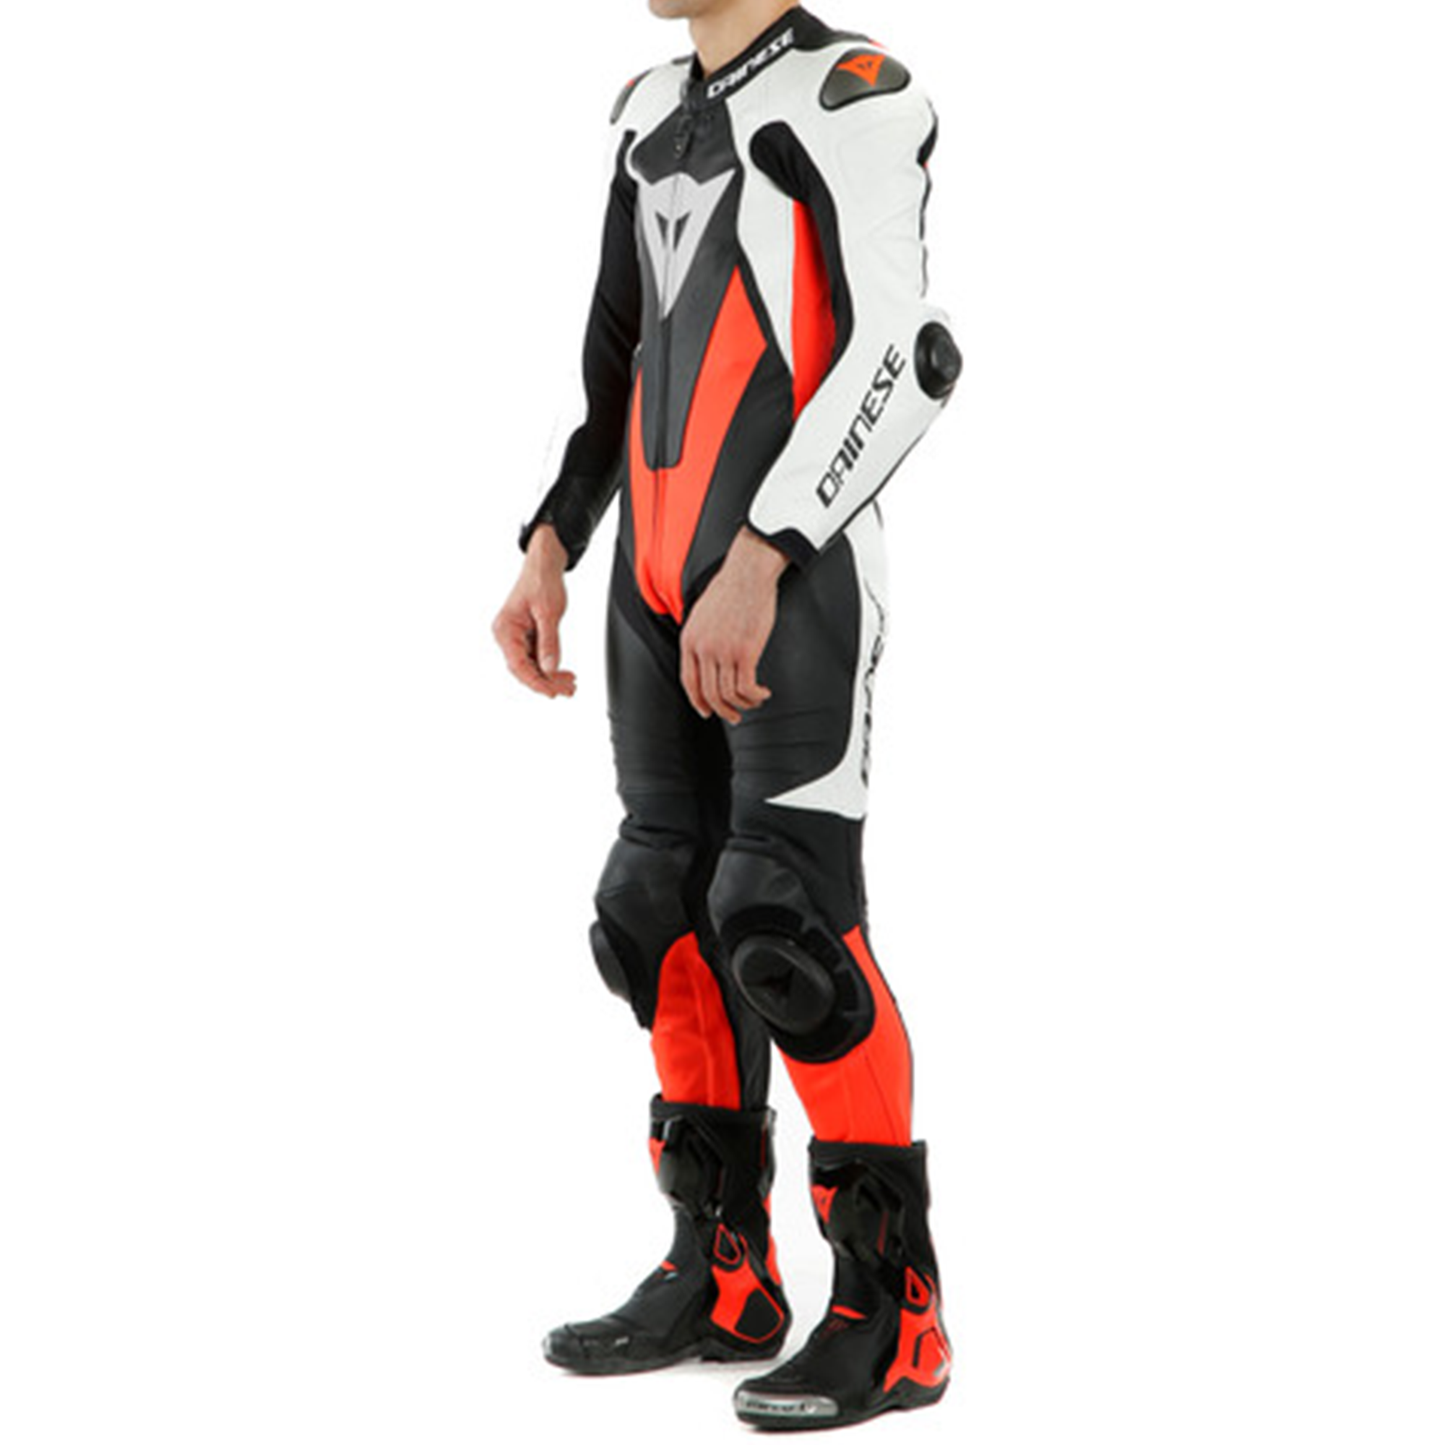 Dainese Laguna Seca 5 1 Piece Perf Leather Suit - Black/White/Flo Red